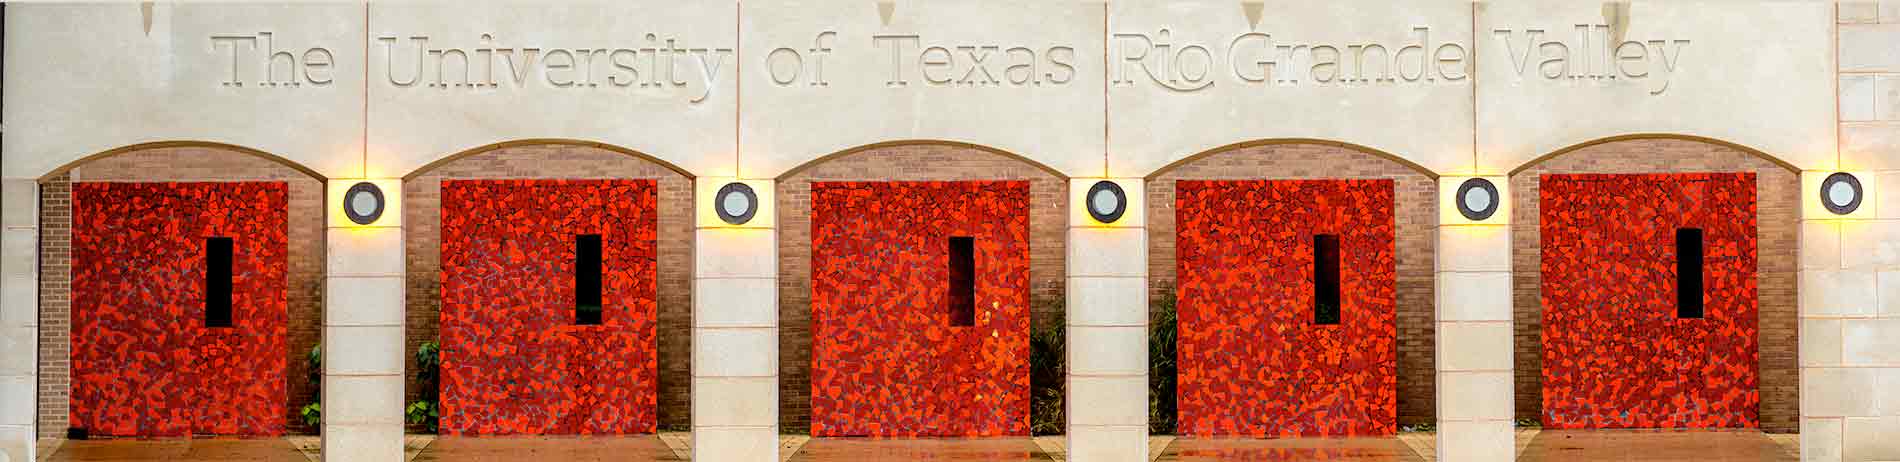 UTRGV arches Page Banner 